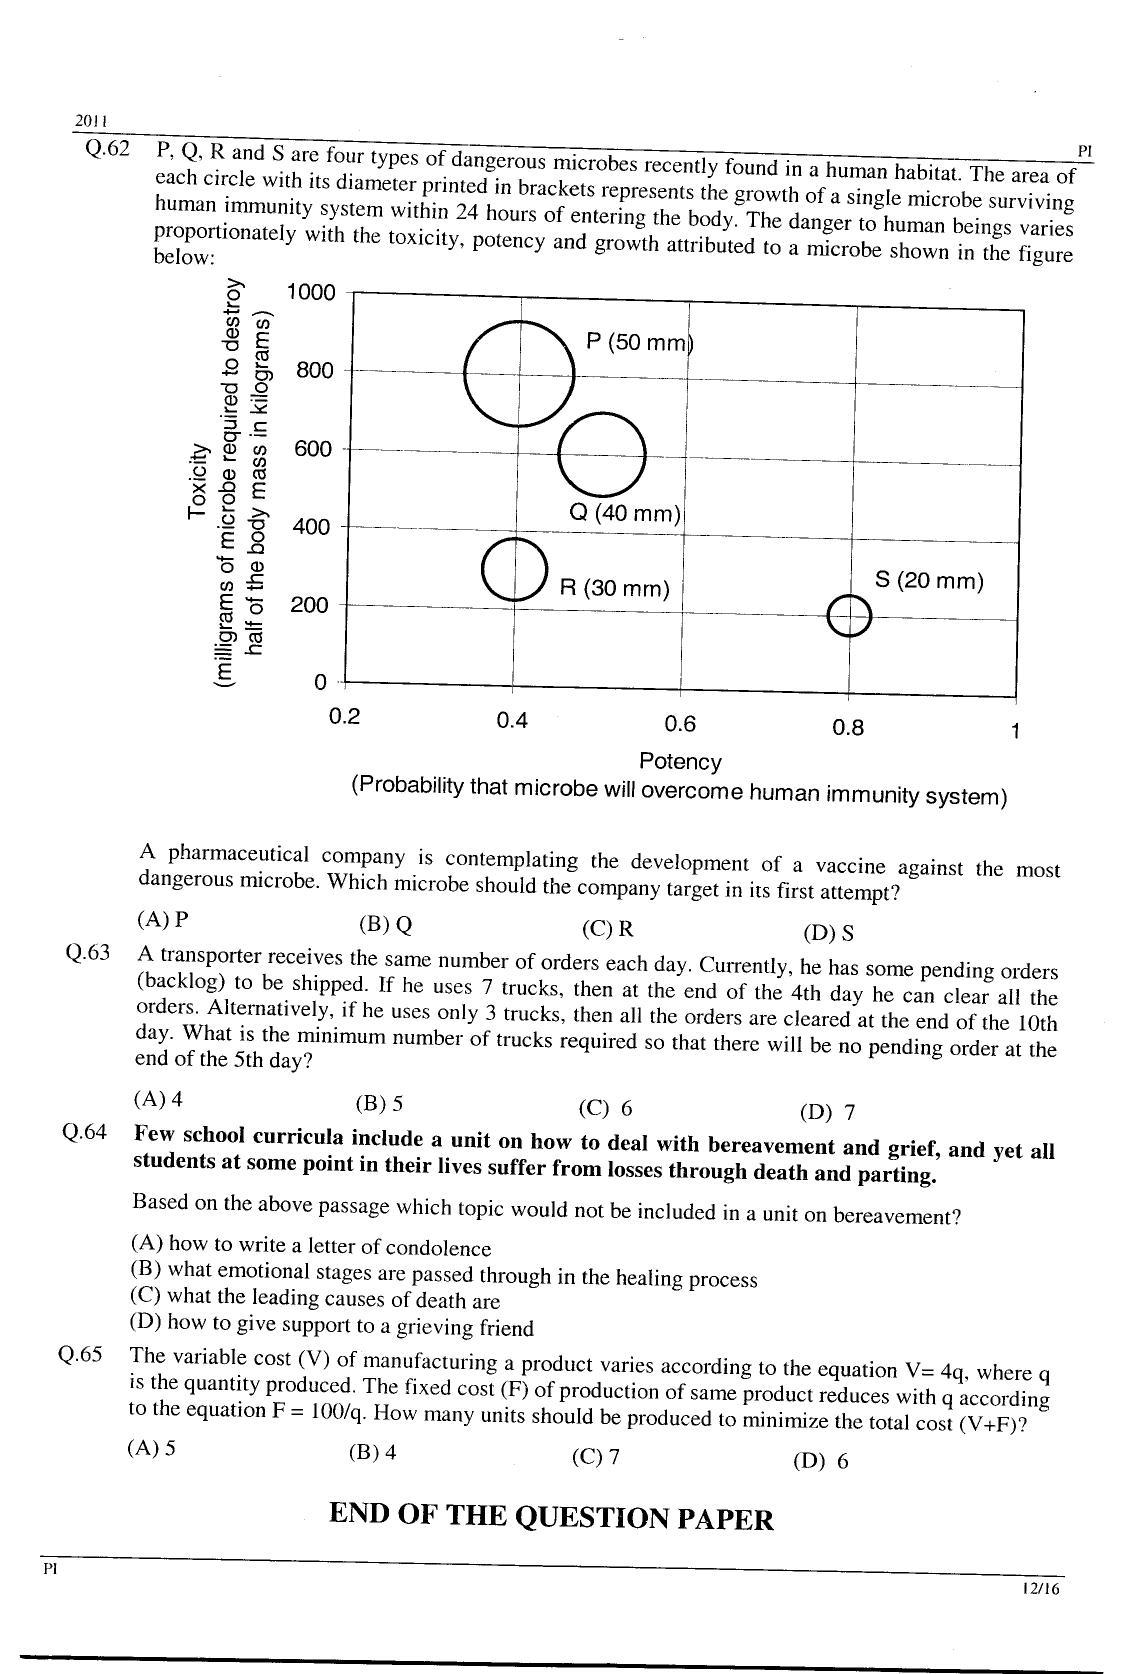 GATE 2011 Production and Industrial Engineering (PI) Question Paper with Answer Key - Page 12